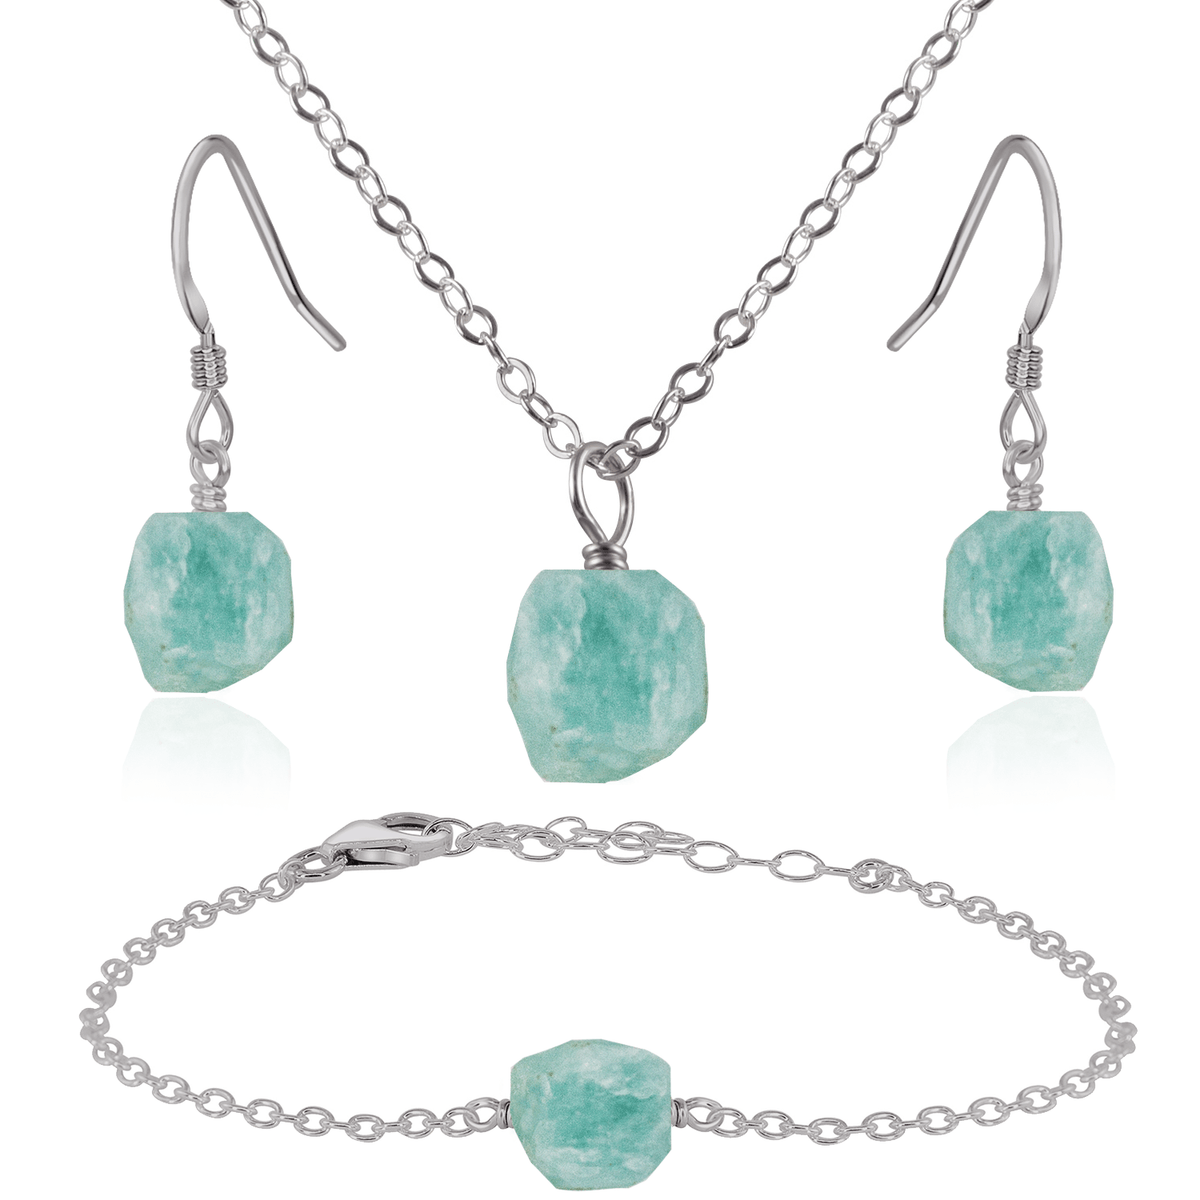 Raw Amazonite Crystal Necklace, Earrings and Bracelet Set - Raw Amazonite Crystal Necklace, Earrings and Bracelet Set - Stainless Steel / Cable / Necklace & Earrings & Bracelet - Luna Tide Handmade Crystal Jewellery